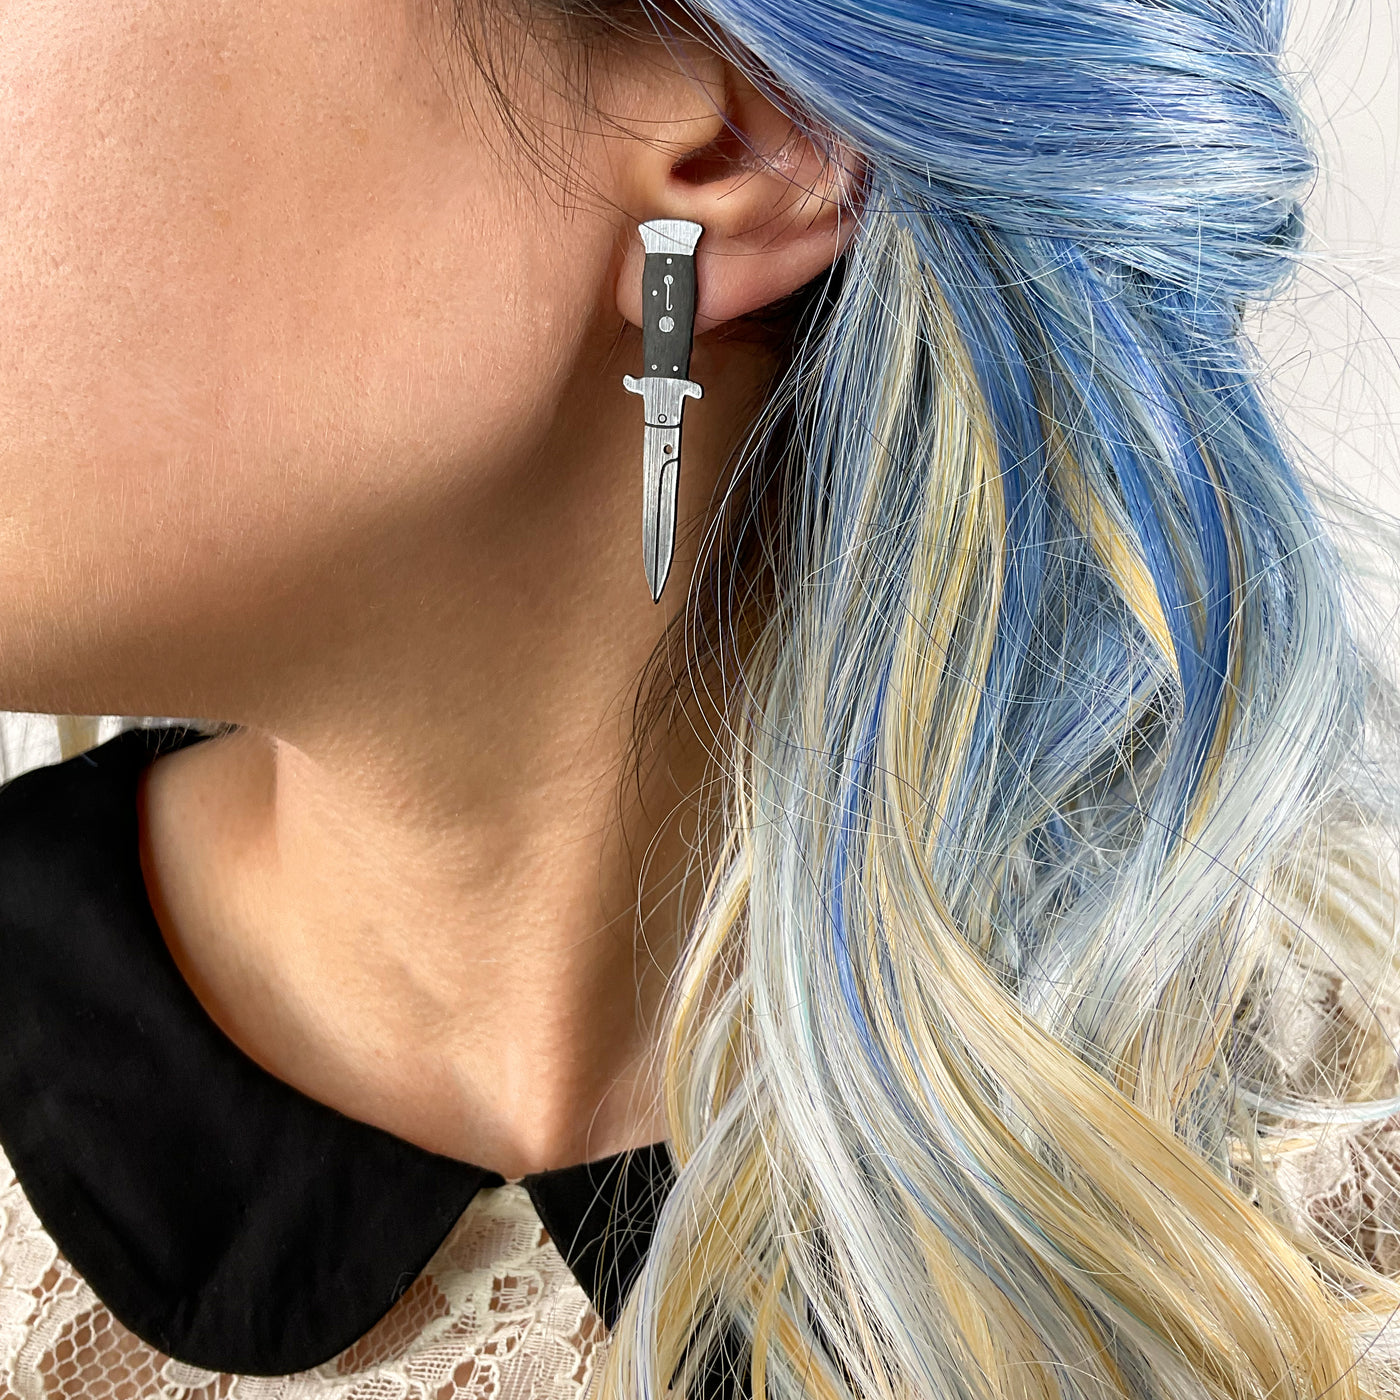 Silver switchblade stud earring on the earlobe of an alternative woman with blue hair with blonde streaks.